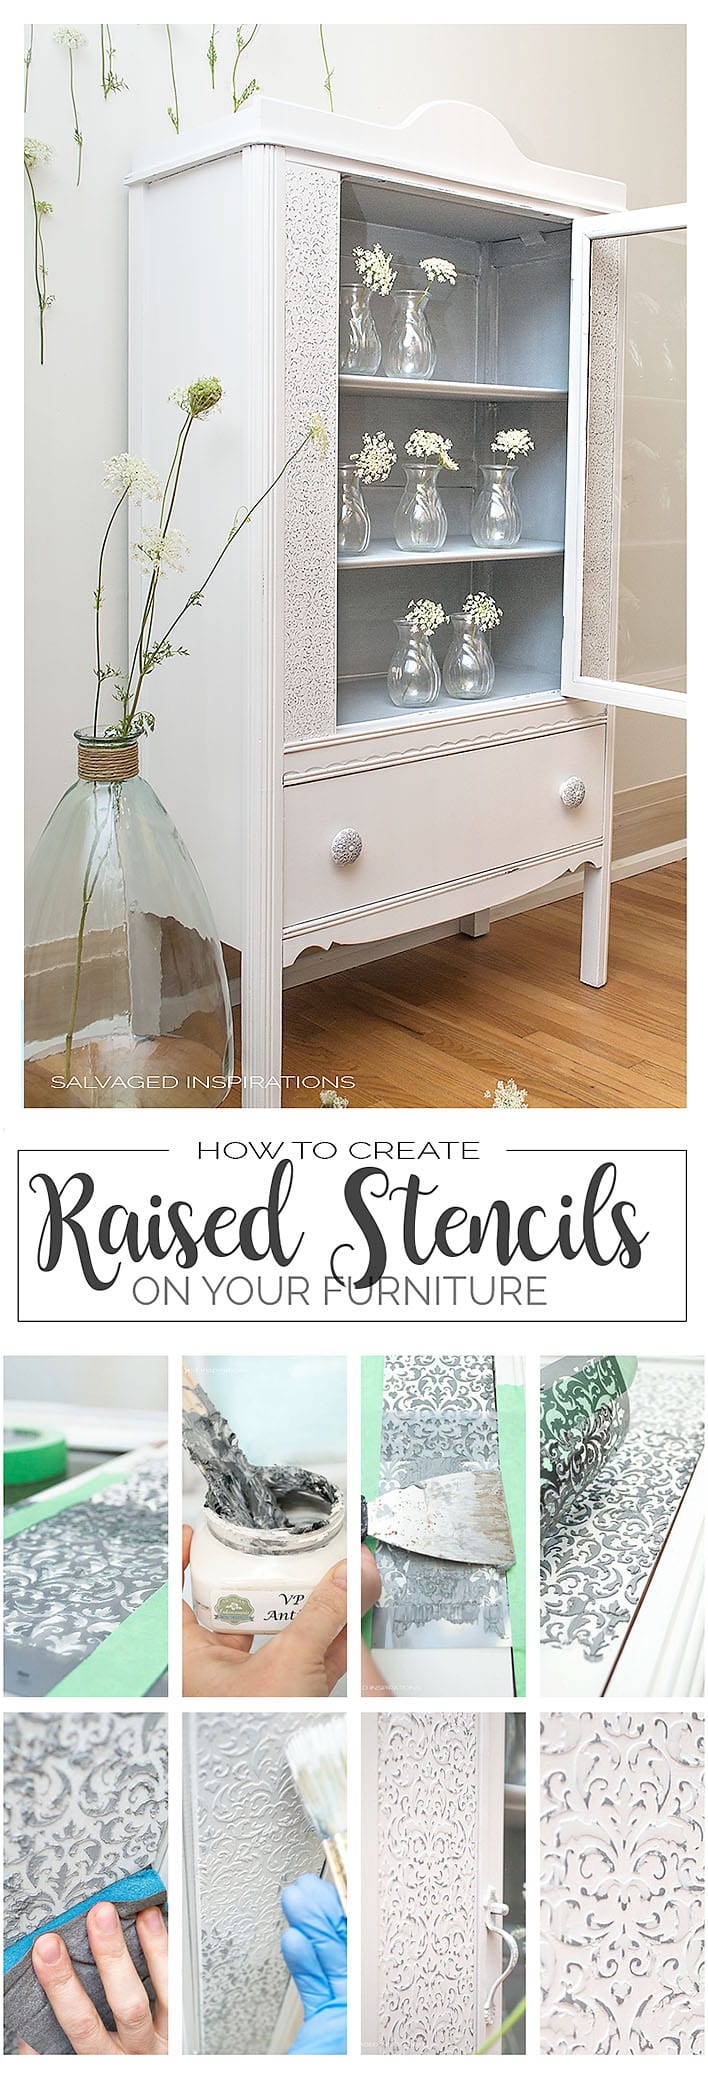 Tutorial - How To Create Raised Stencil Designs on Furniture